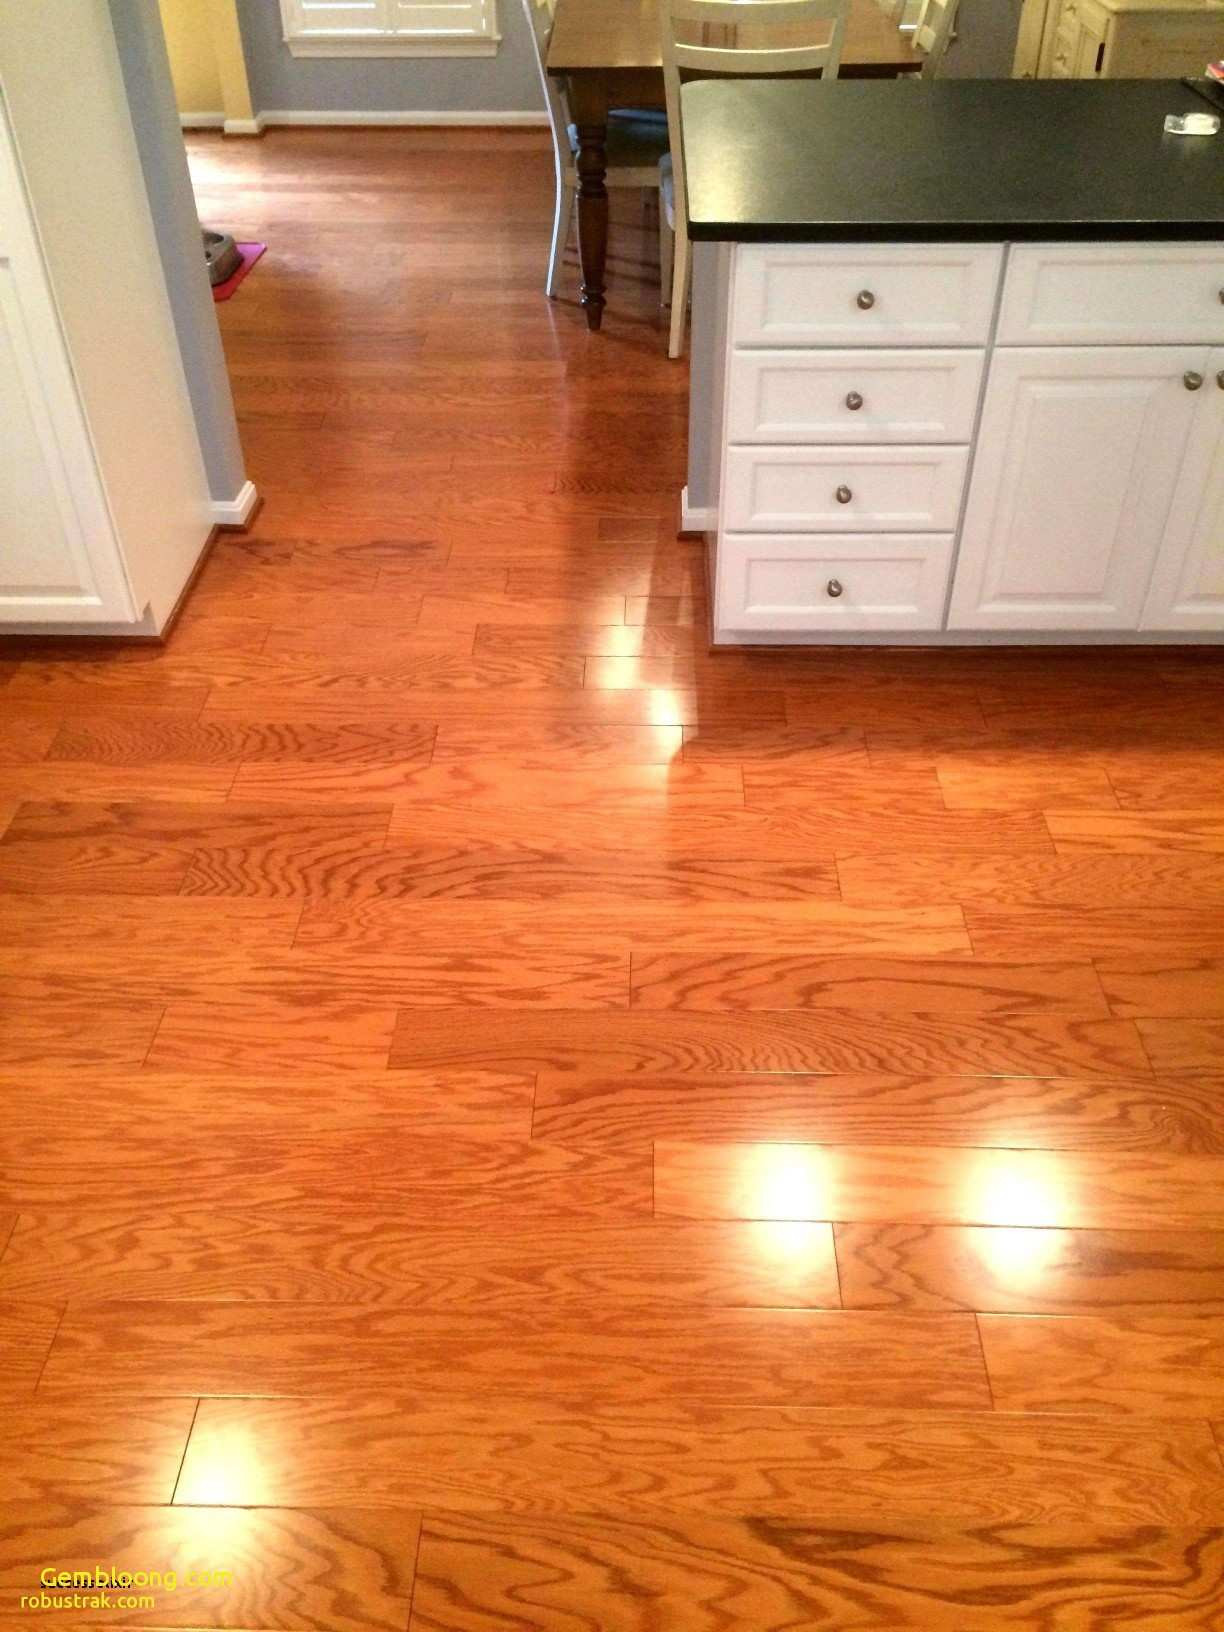 25 Stunning Pictures Of Hardwood Floors In Kitchens 2024 free download pictures of hardwood floors in kitchens of wood for floors facesinnature with hardwood floors in the kitchen fresh where to buy hardwood flooring inspirational 0d grace place barnegat